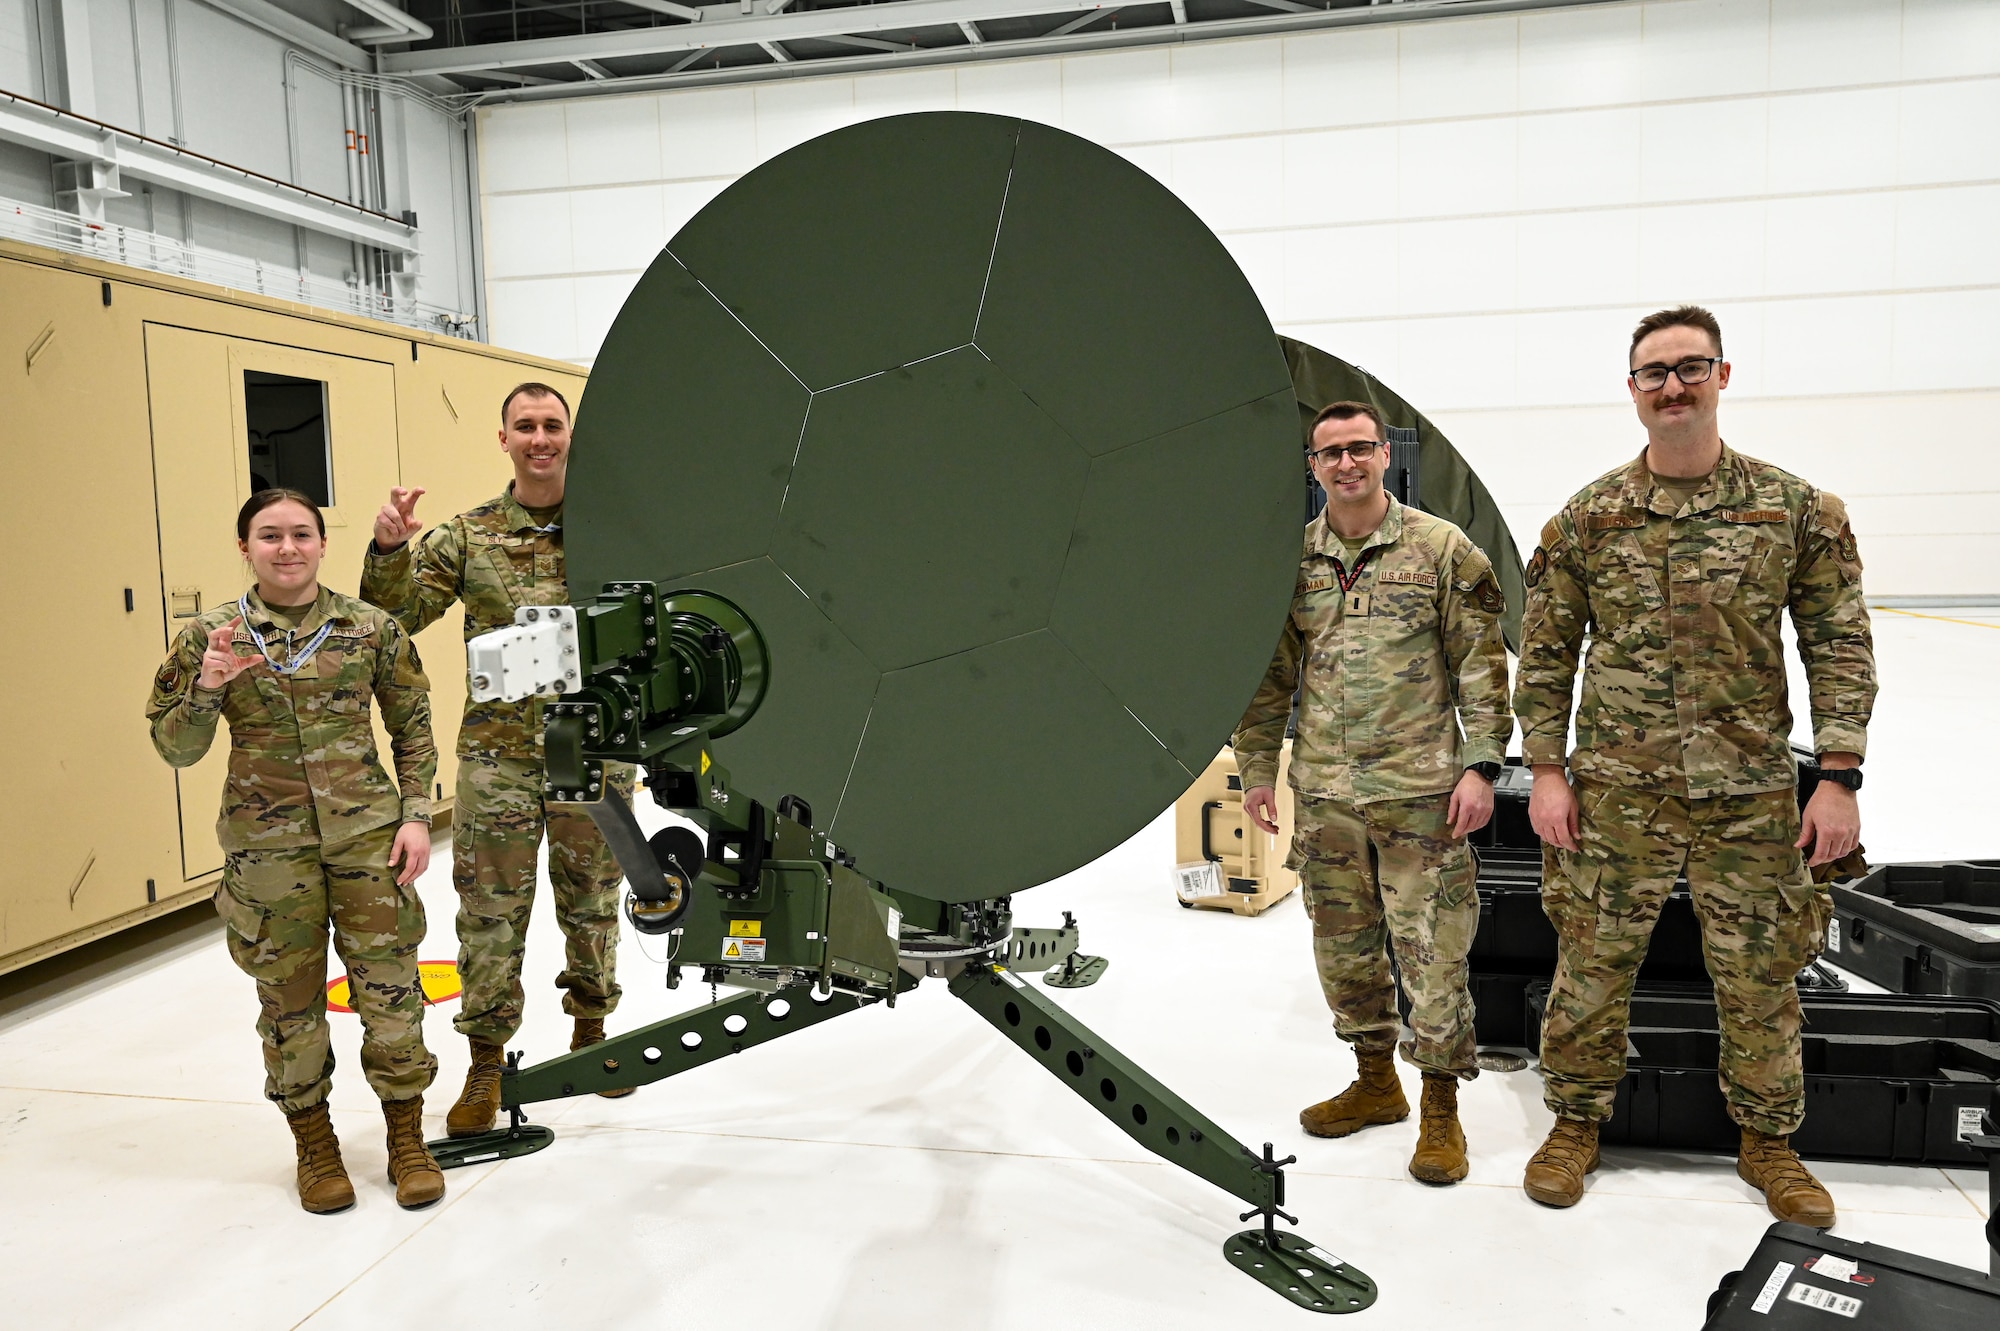 Airmen pose for a photo in front of a communication satellite